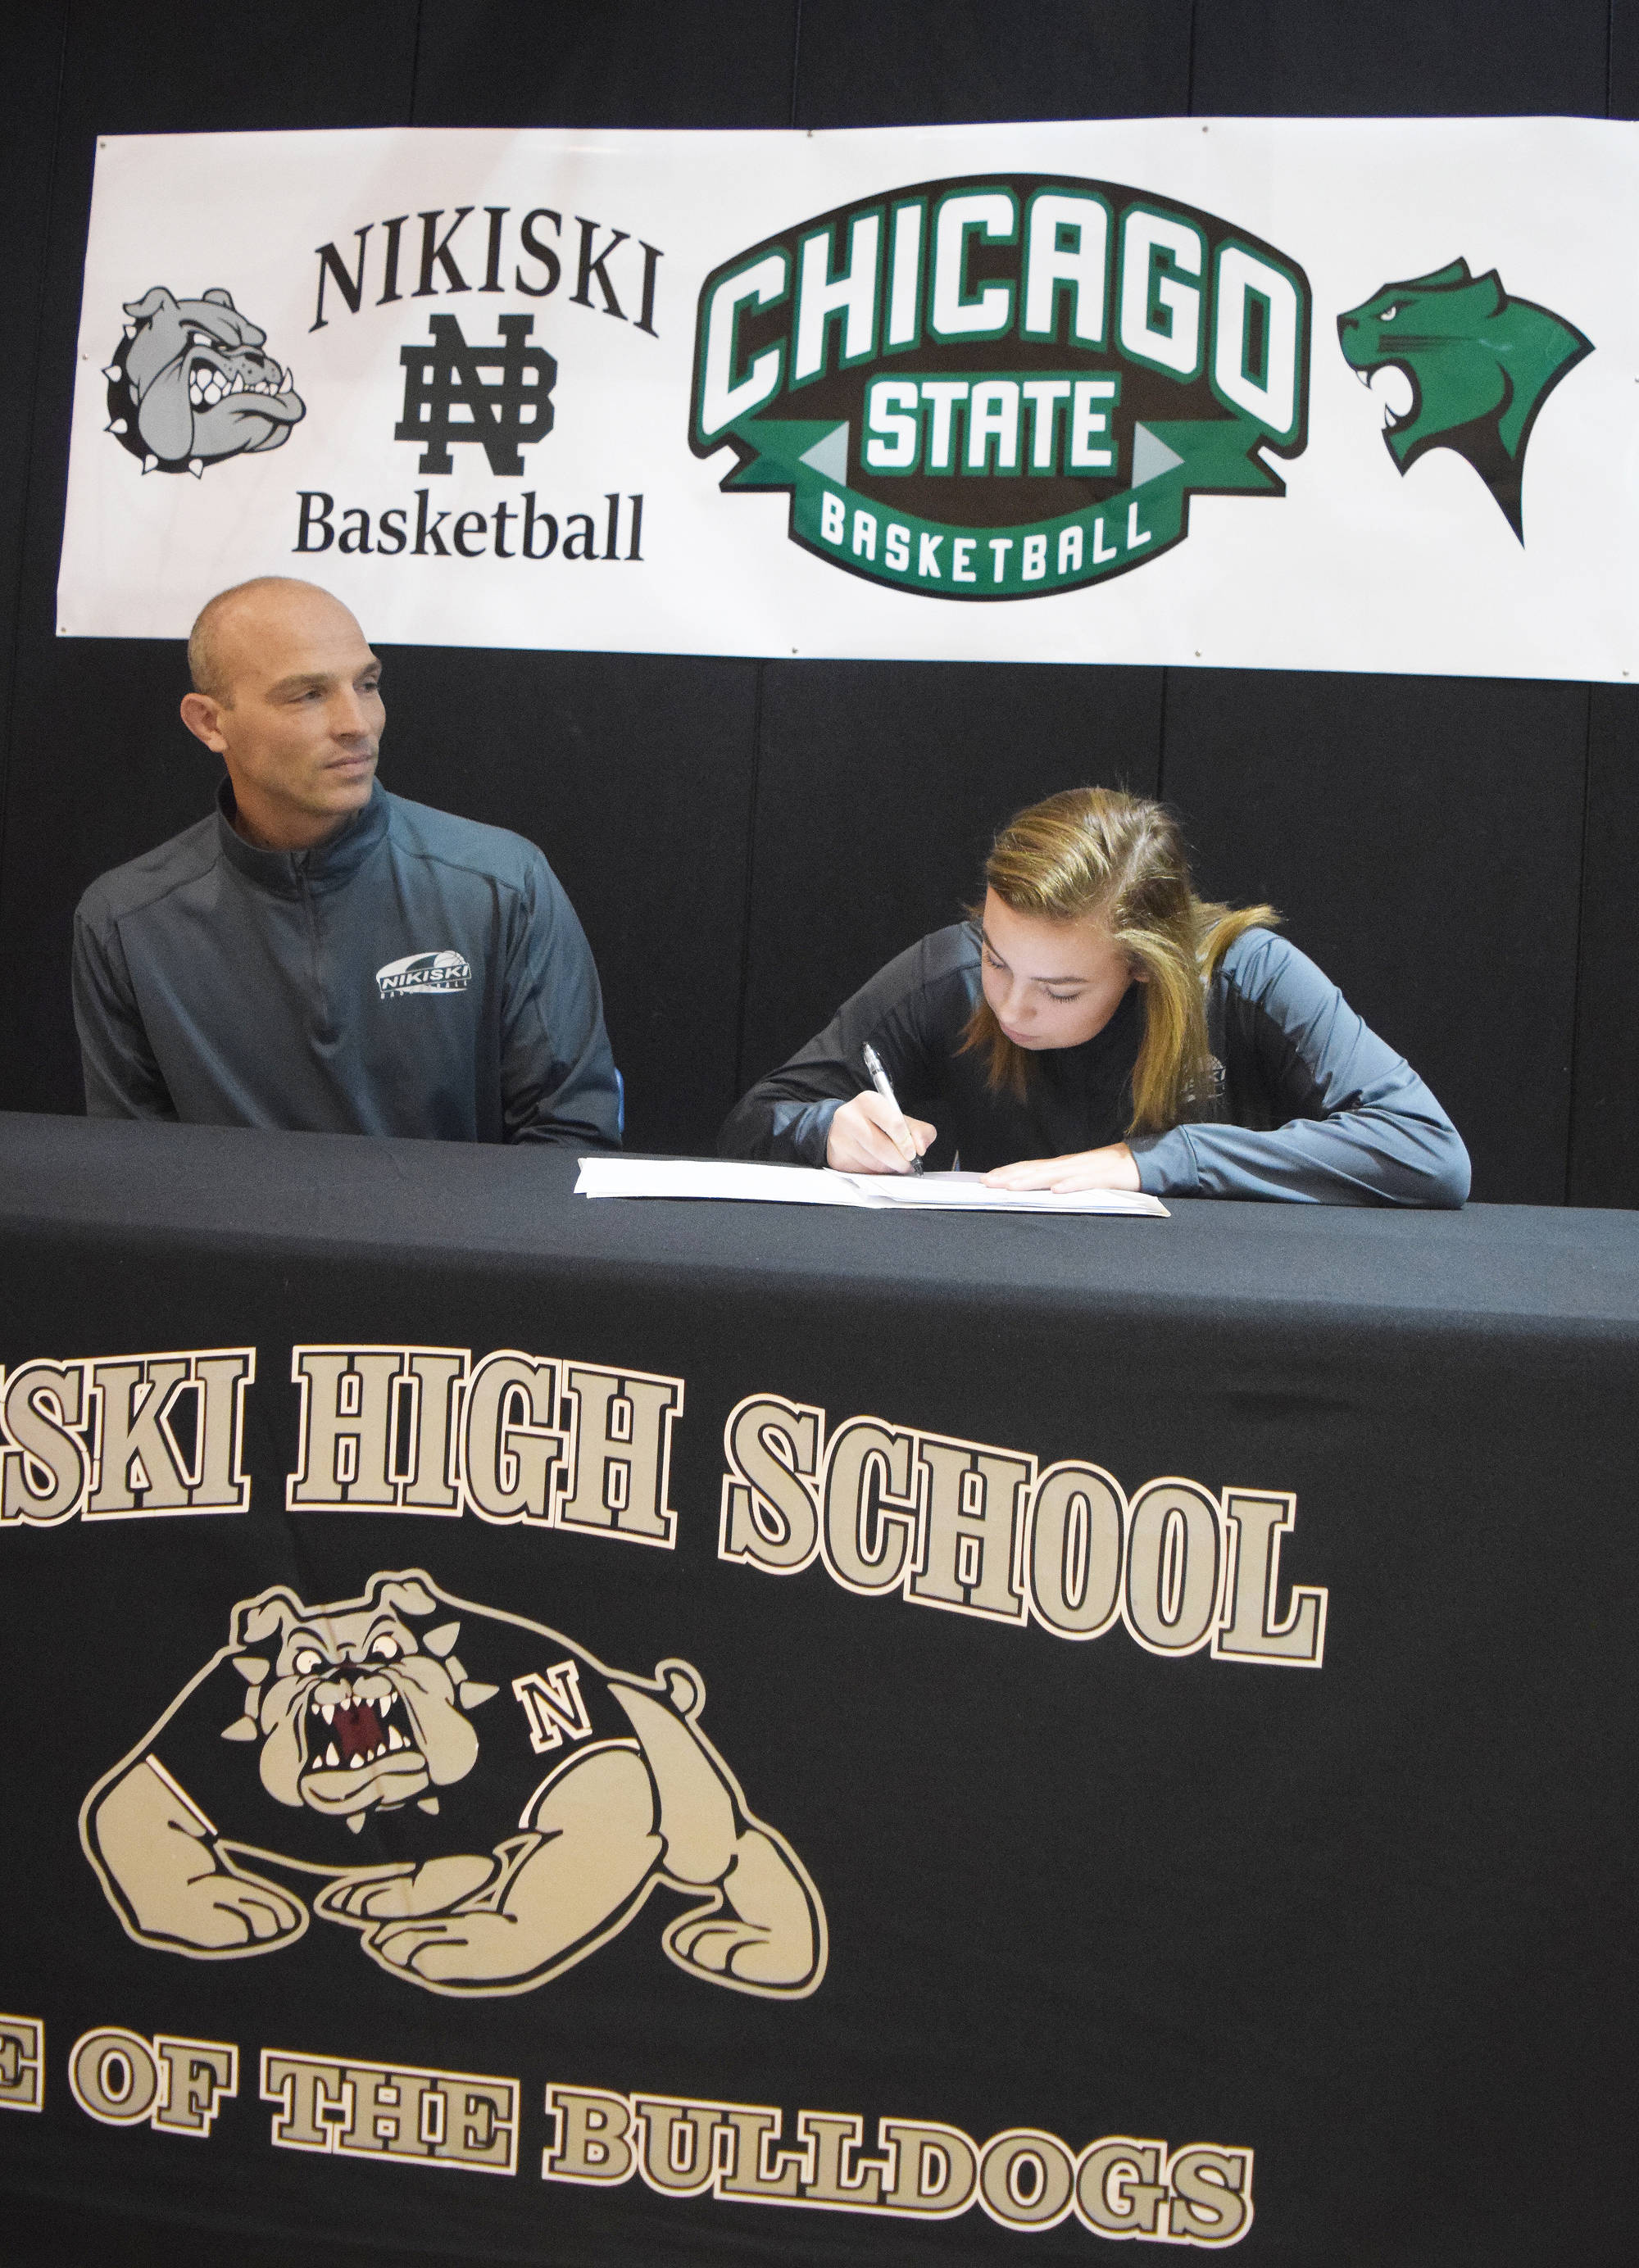 Nikiski senior Bethany Carstens signs her letter of intent, with father Dan Carstens looking on, to play at Division I basketball at Chicago State University in a ceremony Thursday at Nikiski High School. (Photo by Joey Klecka/Peninsula Clarion)